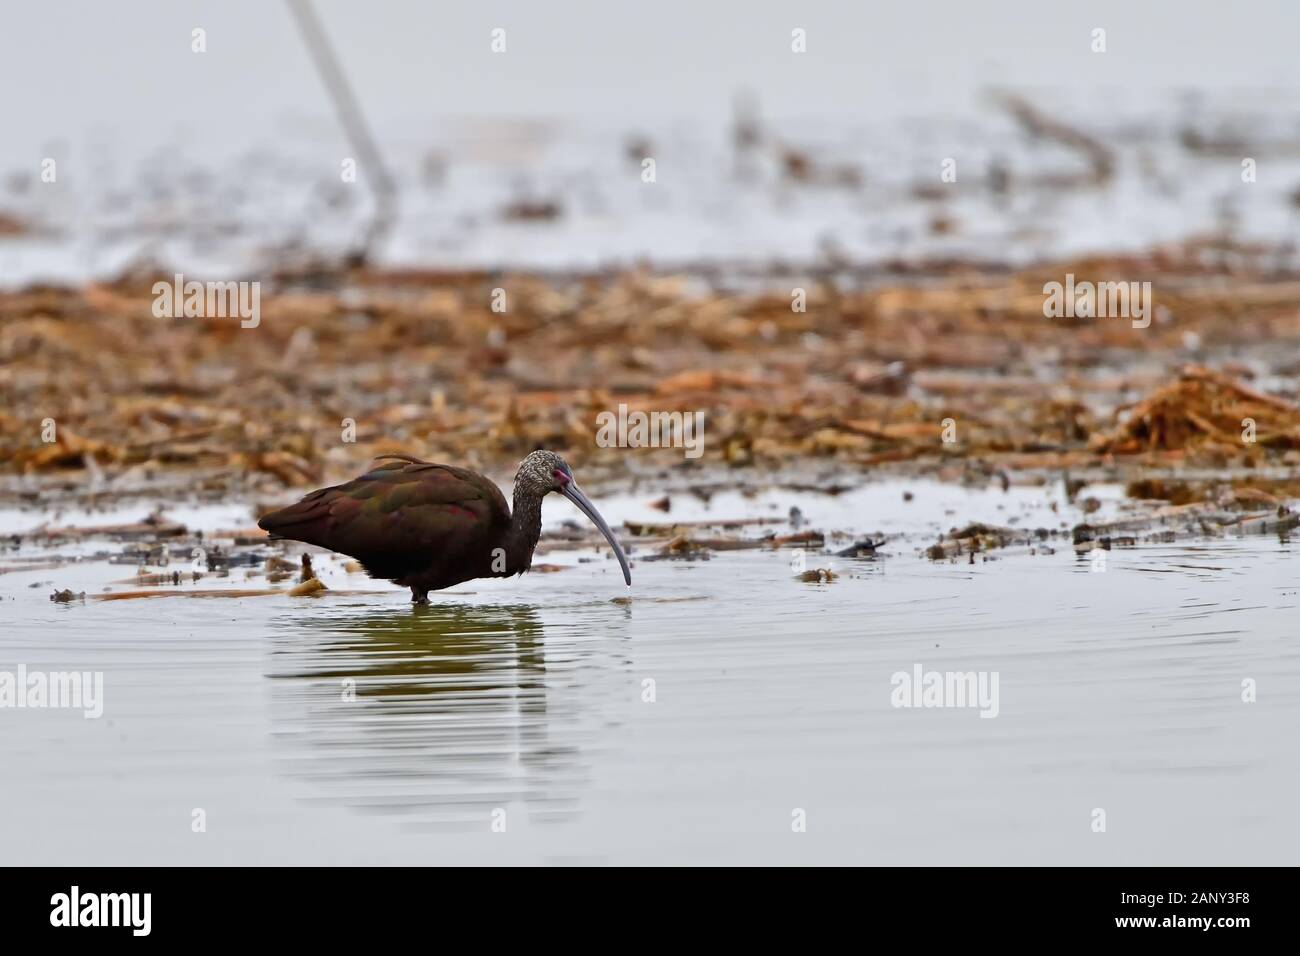 A Glossy Ibis digging in Shallow Water ar MErced Wildlife Refuge, California, USA Stock Photo